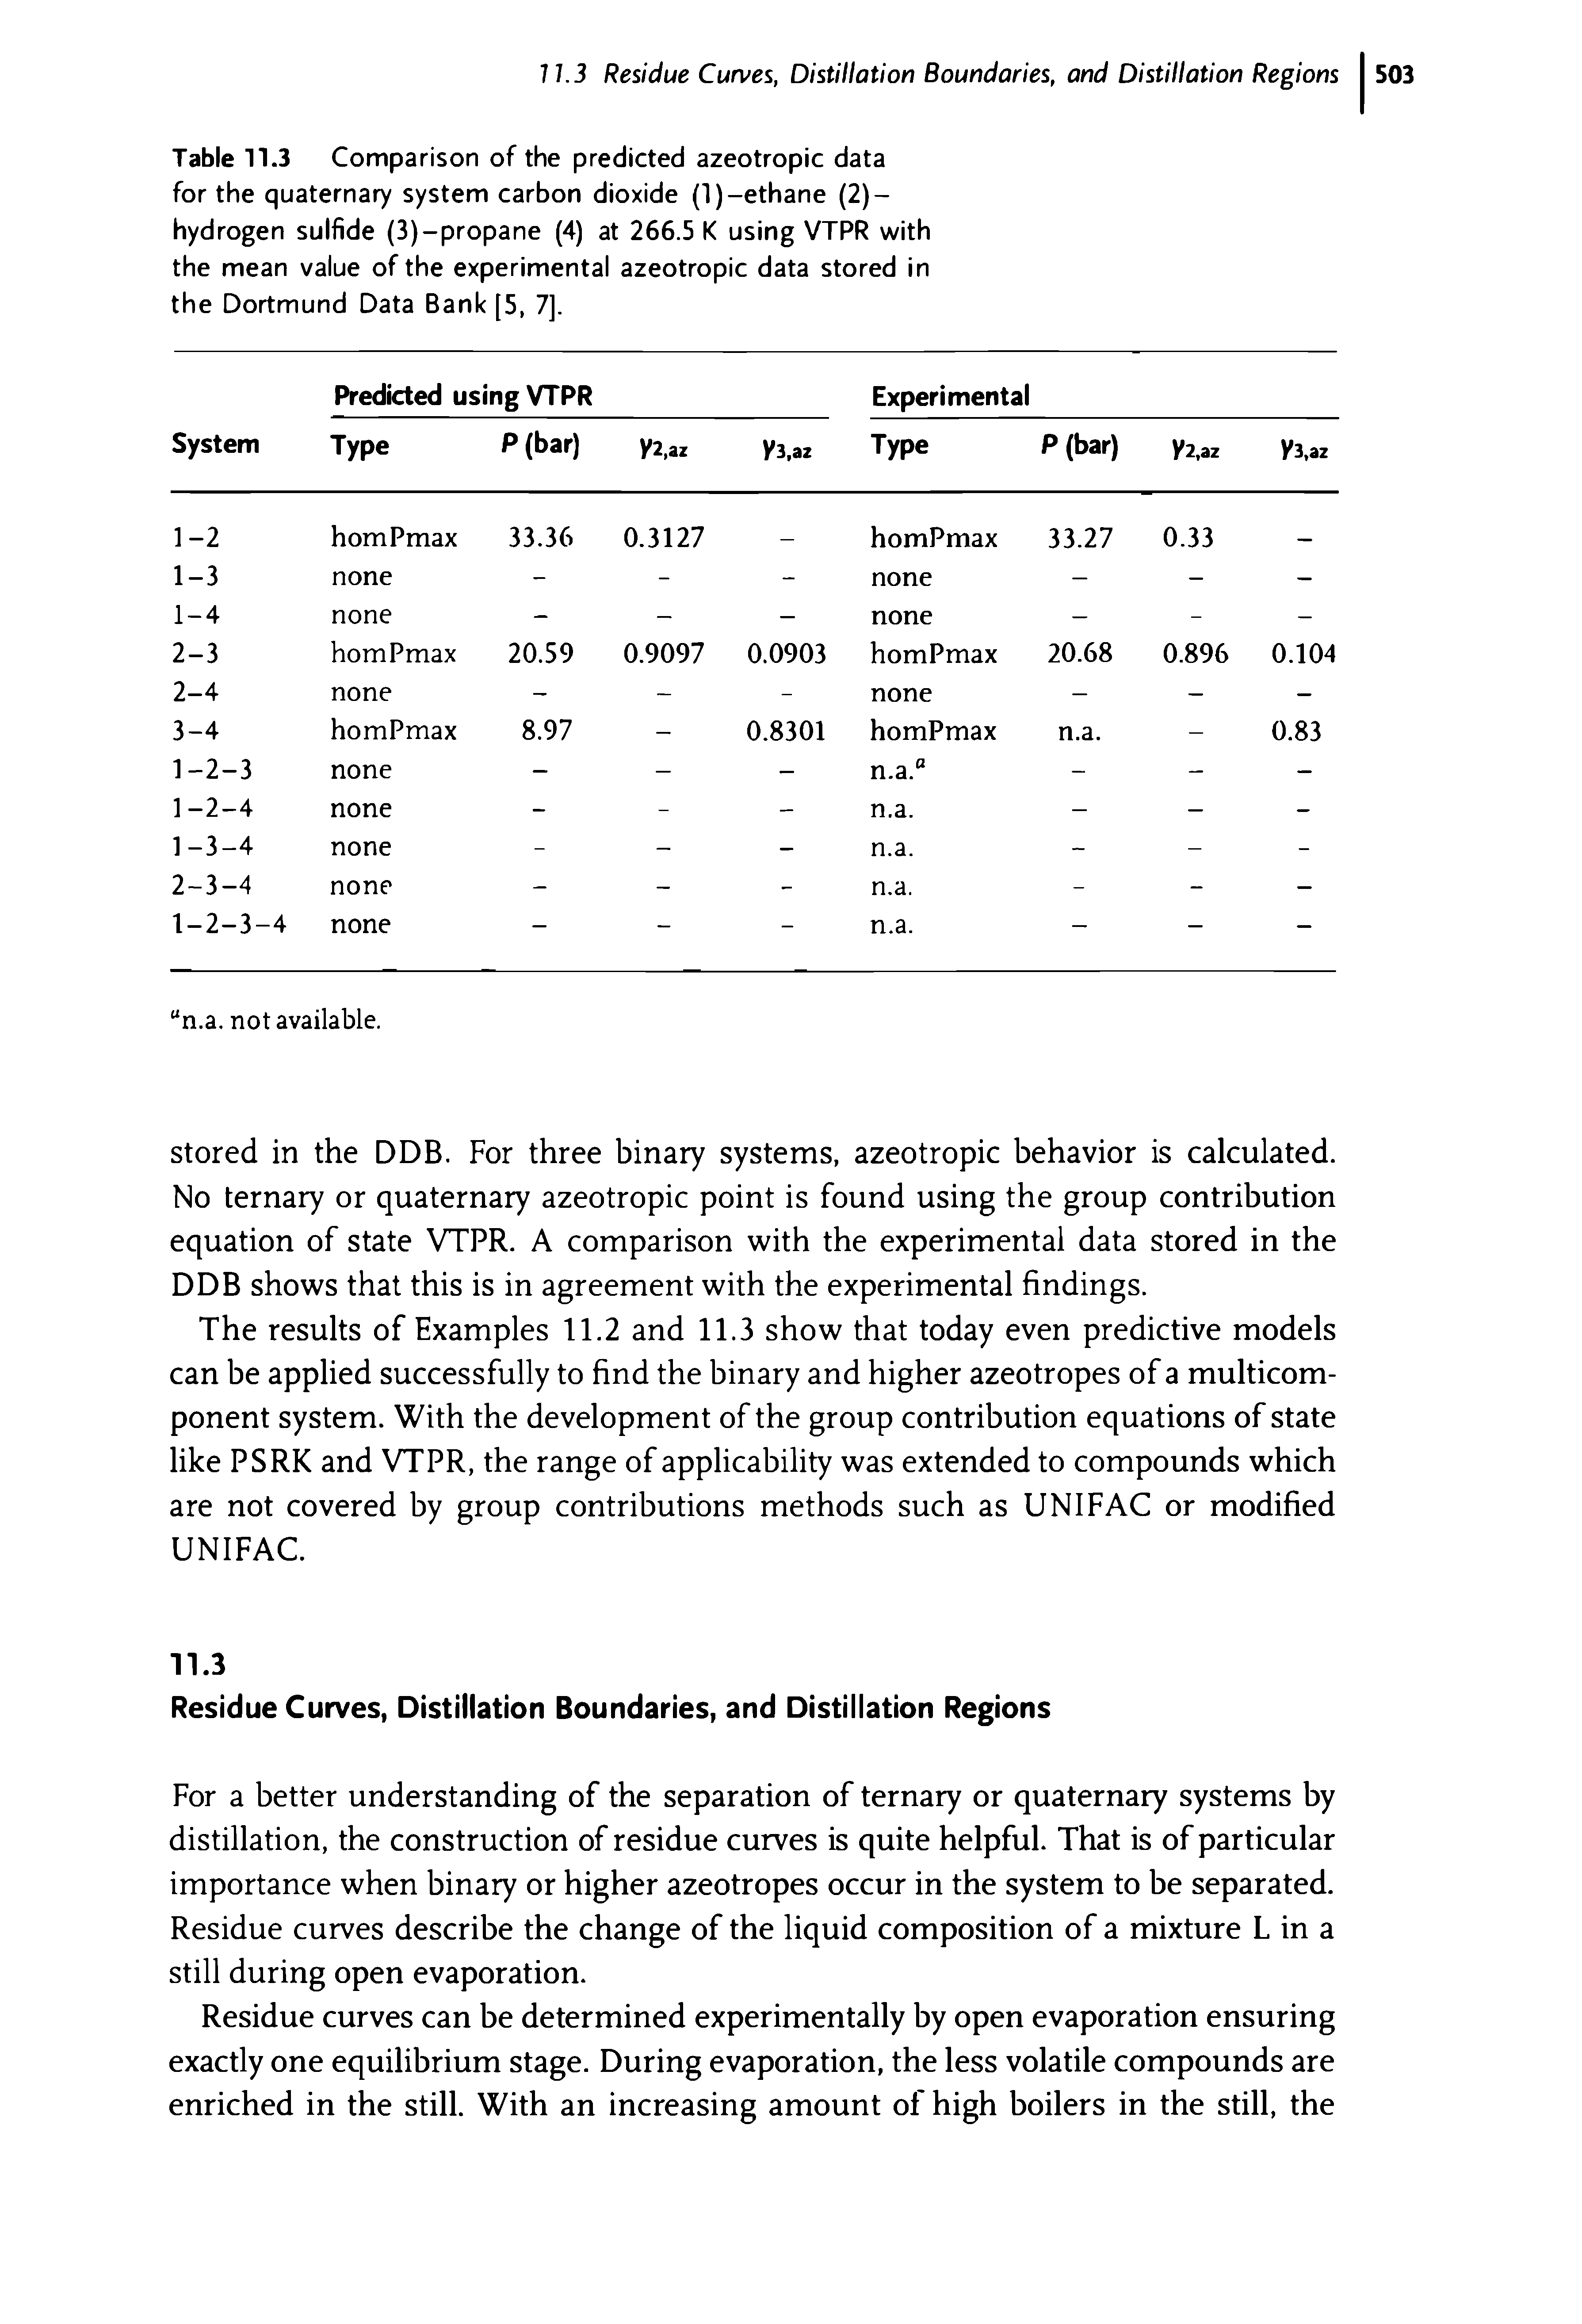 Table 11.3 Comparison of the predicted azeotropic data for the quaternary system carbon dioxide (1)-ethane (2)-hydrogen sulfide (3)-propane (4) at 266.5 K using VTPR with the mean value of the experimental azeotropic data stored in the Dortmund Data Bank [5, 7].